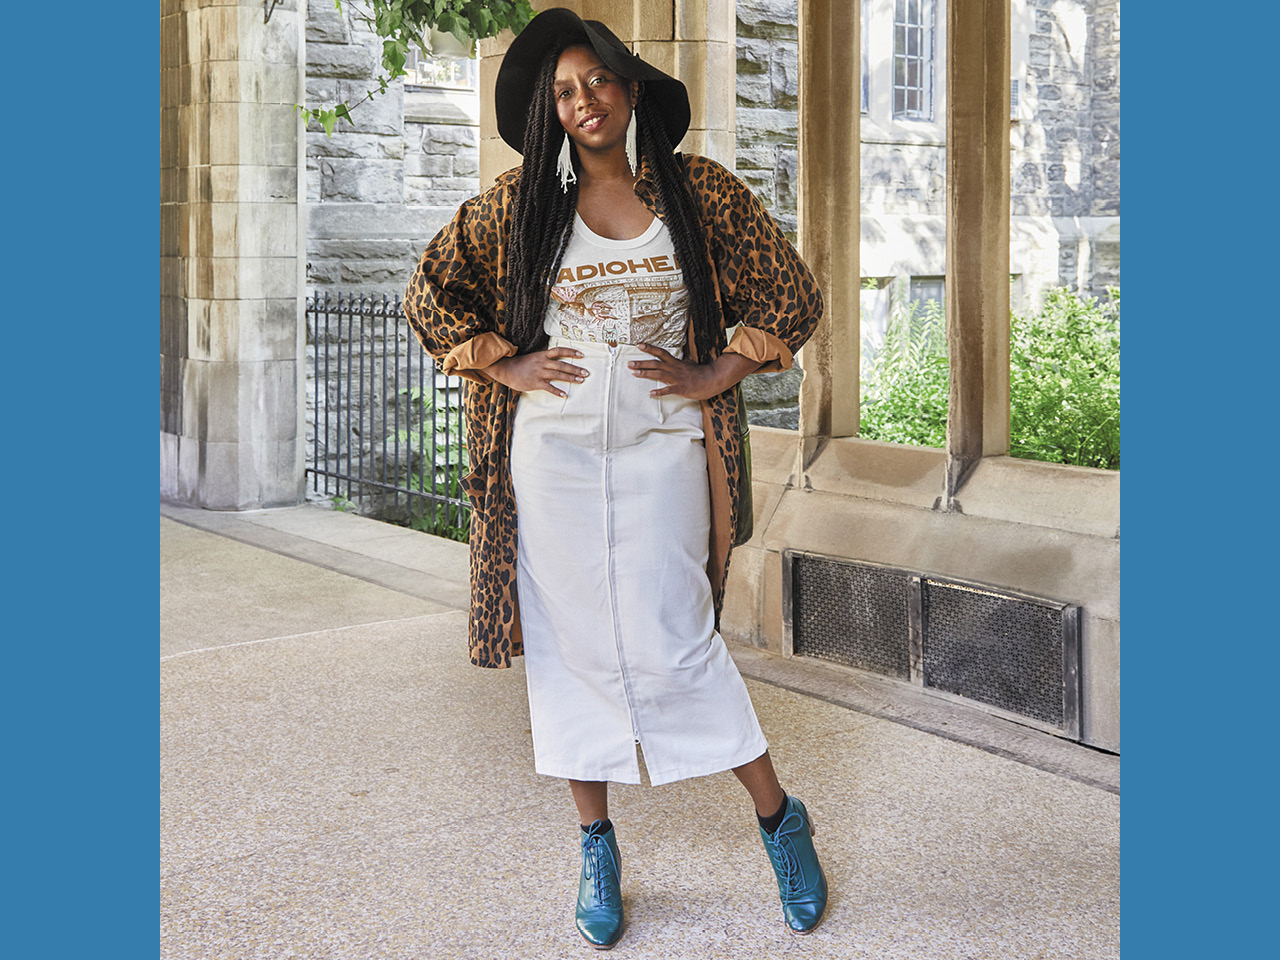 Assistant Professor Hadiya Roderique pictured in her favourite outfit of white midi skirt, Radiohead tee and leopard-print chore coat.